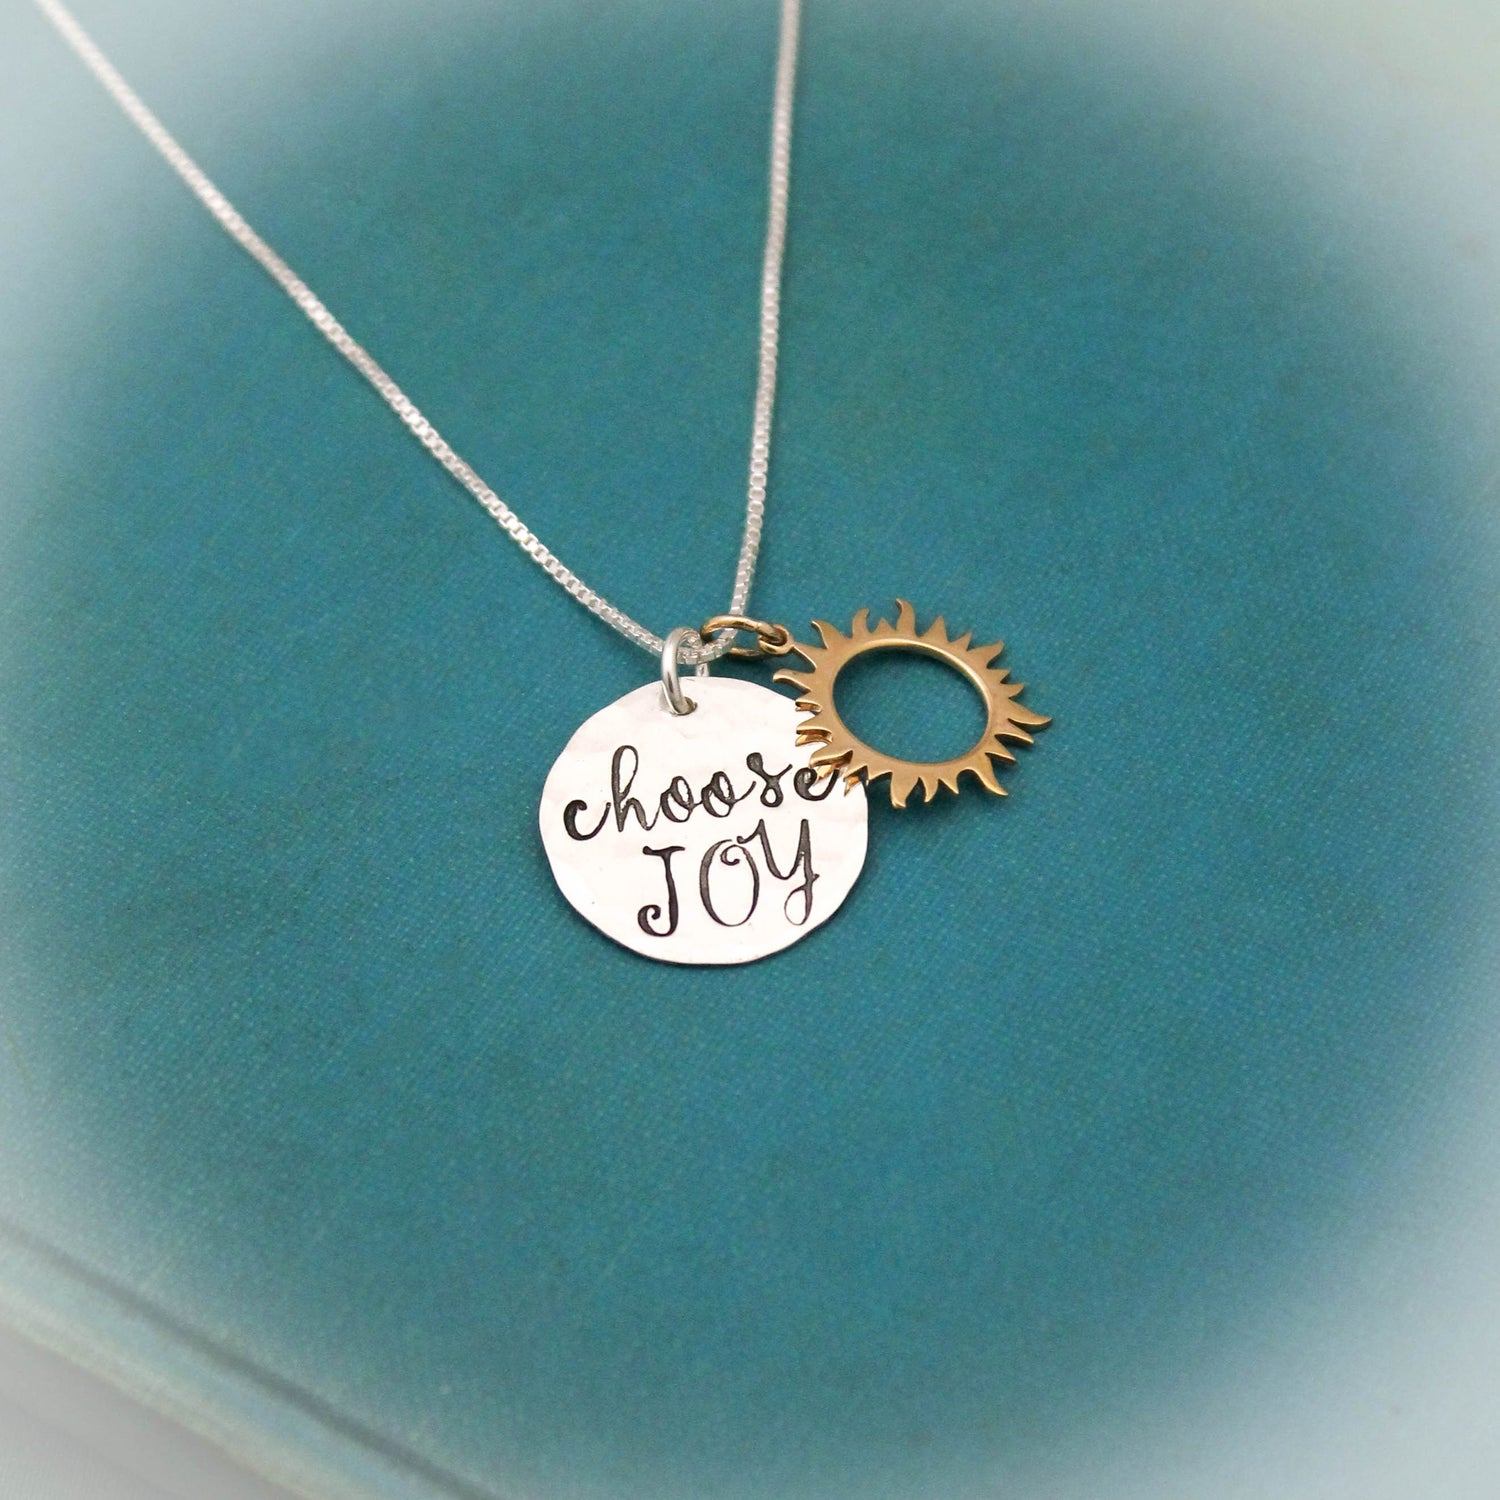 Choose JOY Necklace, Sun Jewelry, Choose JOY Jewelry, Mother Necklace, Gifts for Her, Personalized Hand Stamped Jewelry, Positive Jewelry